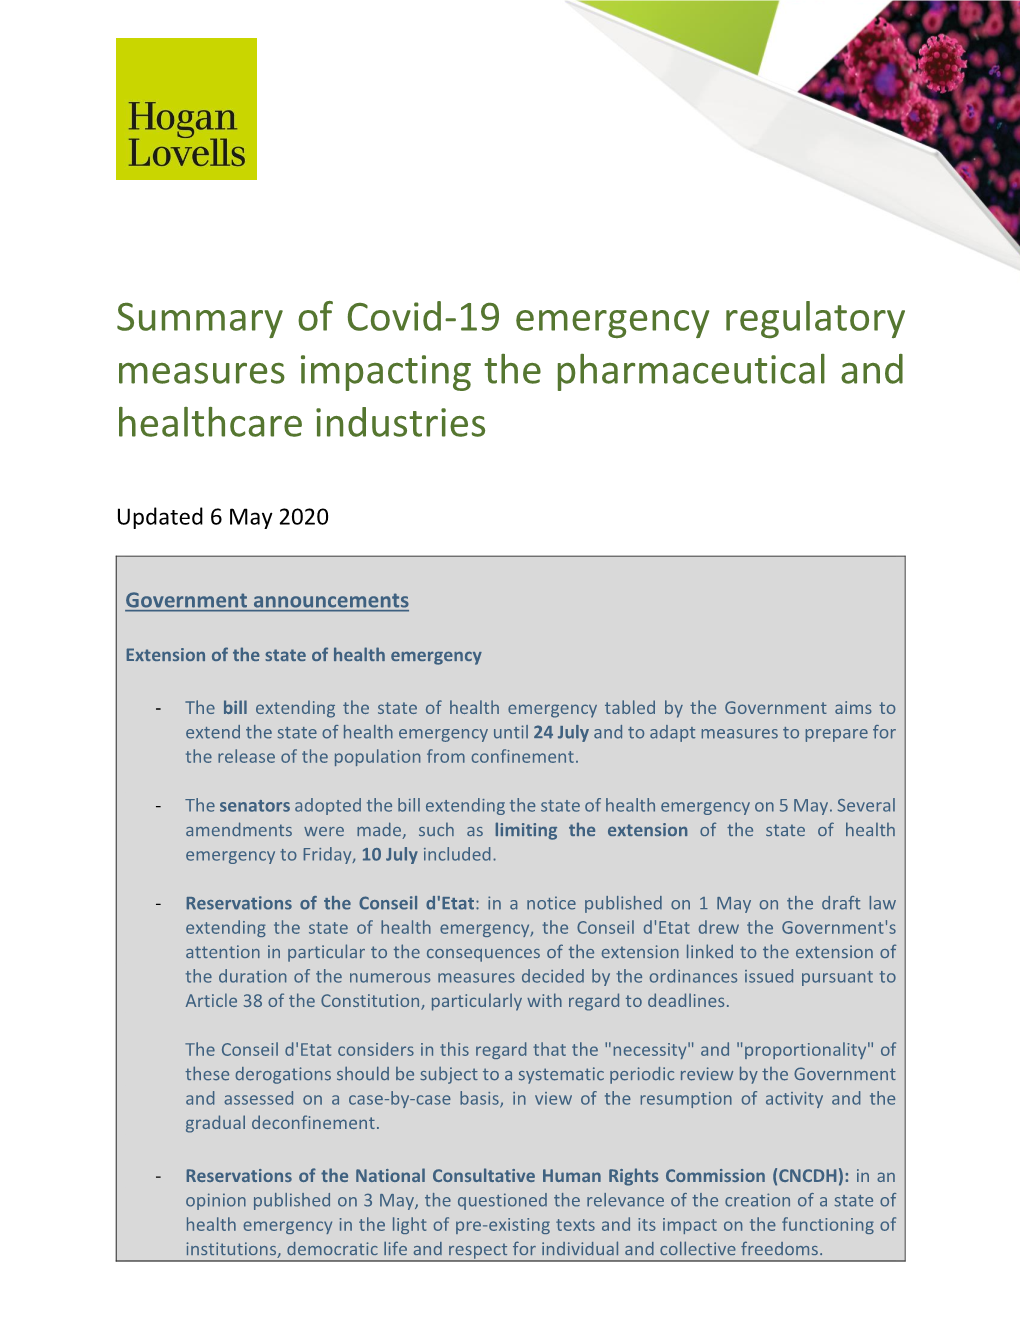 Summary of Covid-19 Emergency Regulatory Measures Impacting the Pharmaceutical and Healthcare Industries